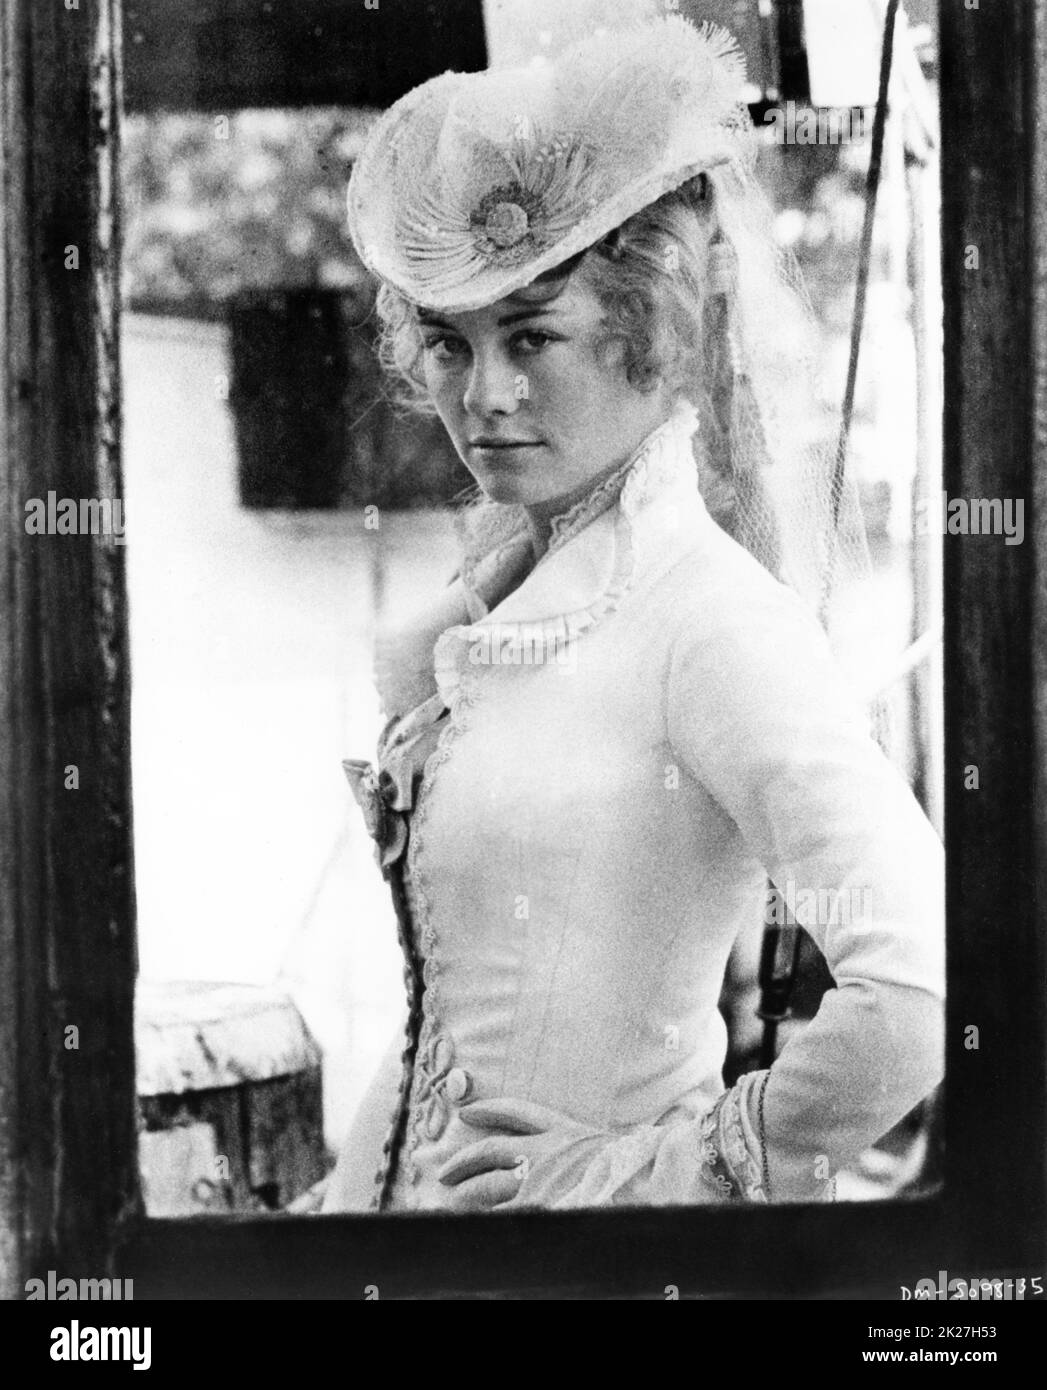 CYBILL SHEPHERD Portrait in DAISY MILLER 1974 director / producer PETER BOGDANOVICH story Henry James screenplay Frederic Raphael costume design Mariolina Bono and John Furniss Copa del Oro / The Directors Company / Paramount Pictures Stock Photo